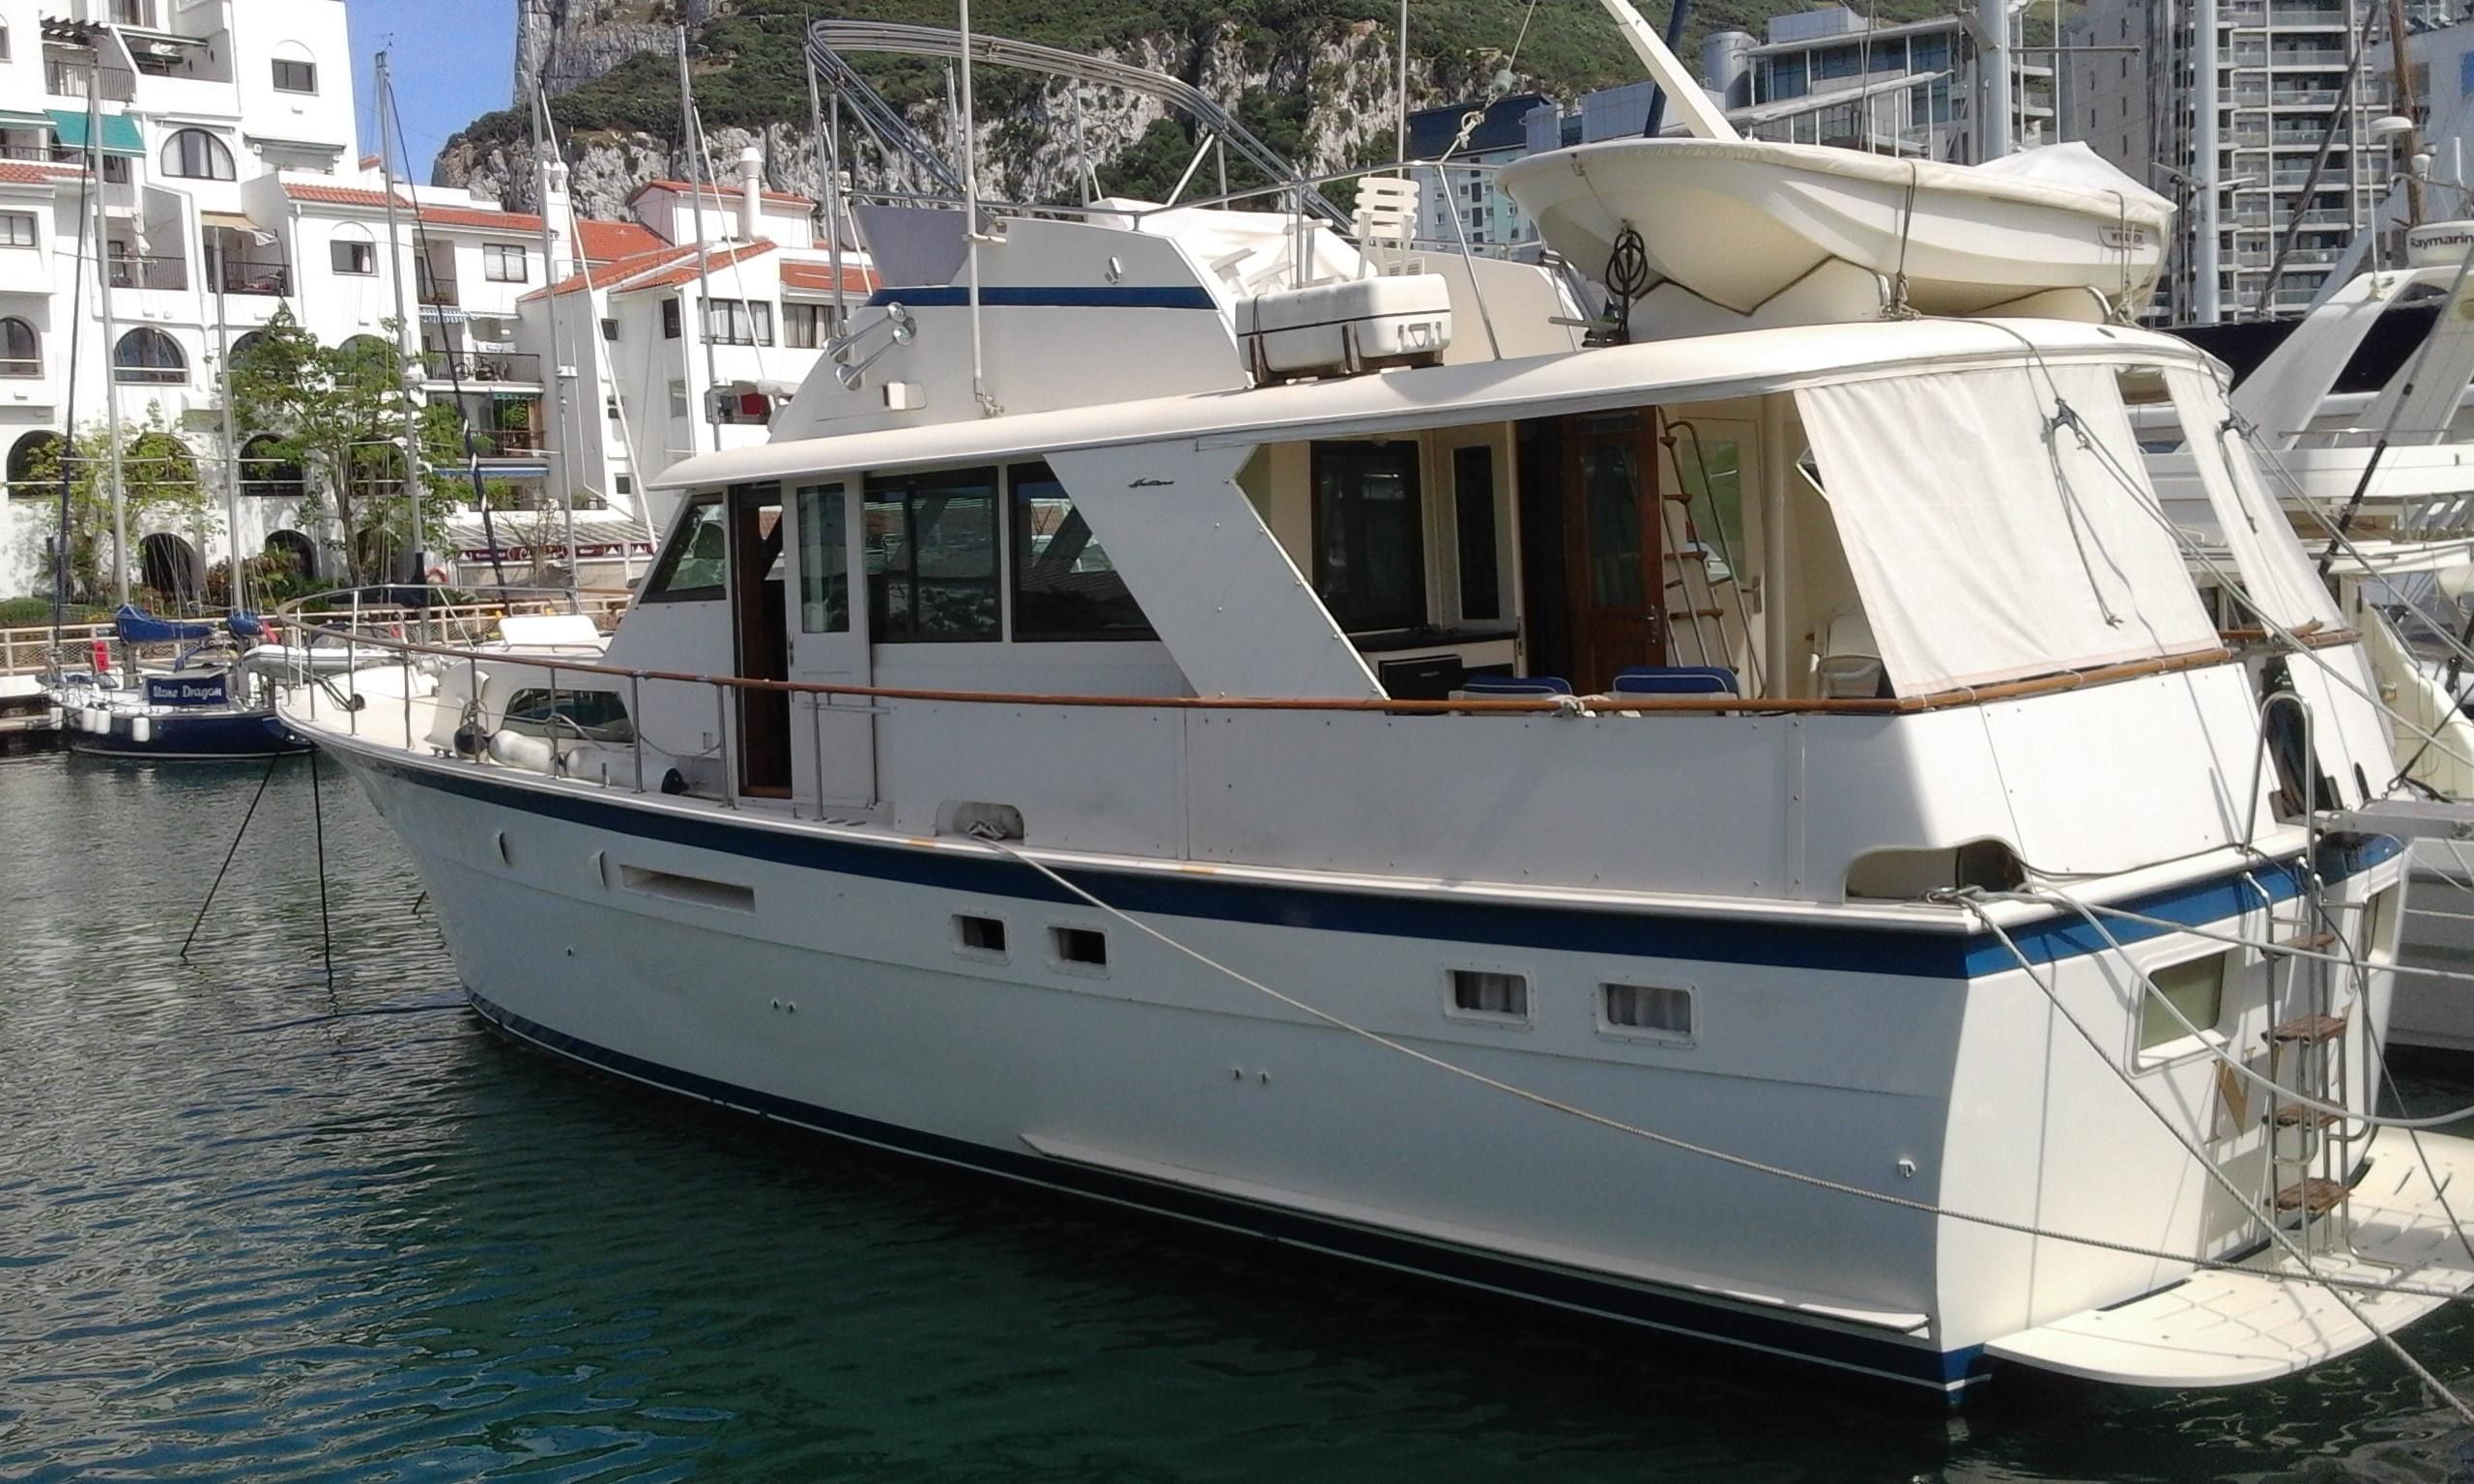 1984 Hatteras 53 Classic Motor Yacht Power Boat For Sale ...